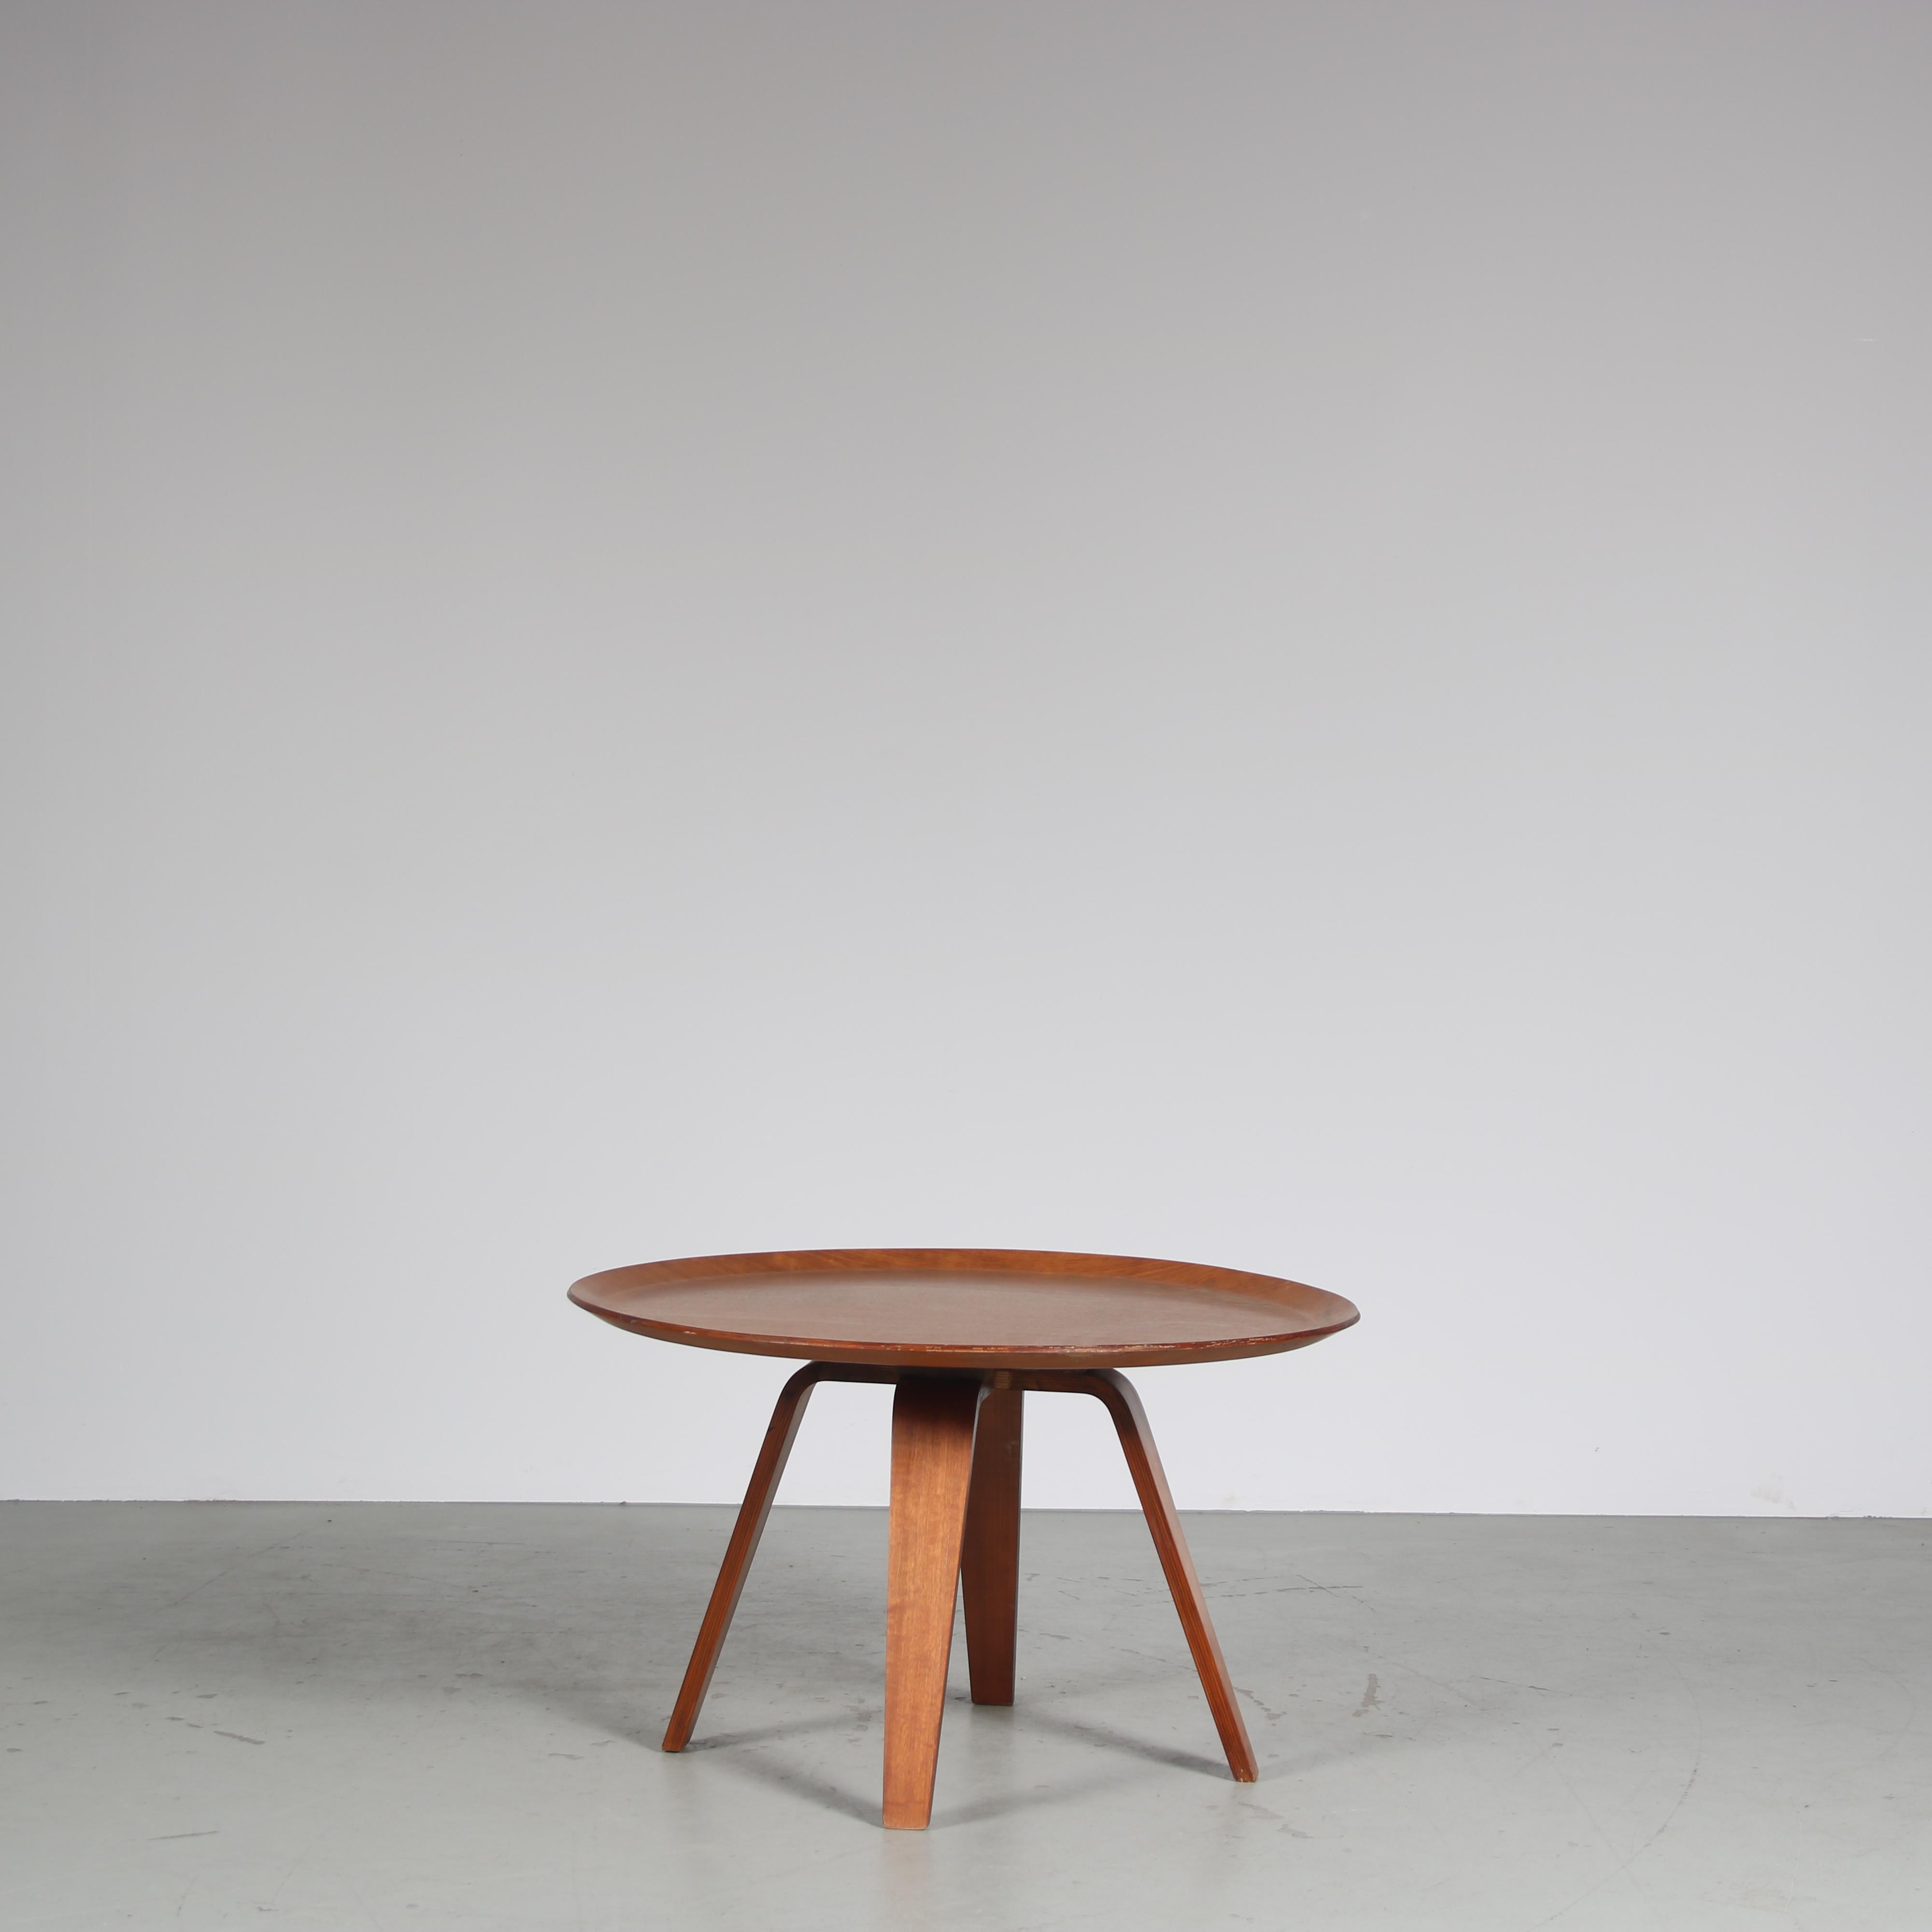 A beautiful coffee table designed by Cor Alons and manufactured by De Boer Gouda in the Netherlands, 1950.

It is completely made of high-quality teak plywood in round and bent shapes, creating a very elegant yet modern style. The table has a